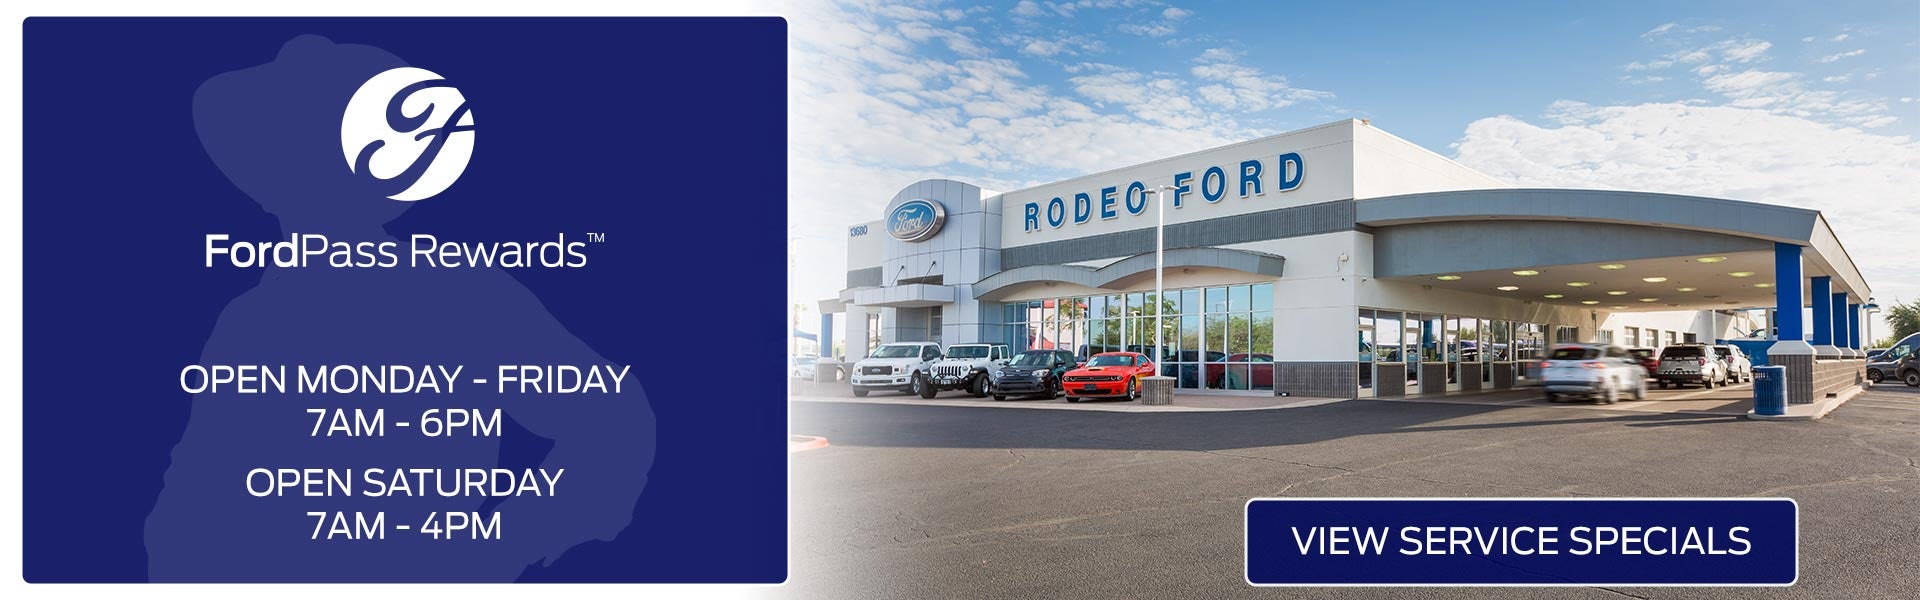 Come to Rodeo Ford and get FordPass Rewards